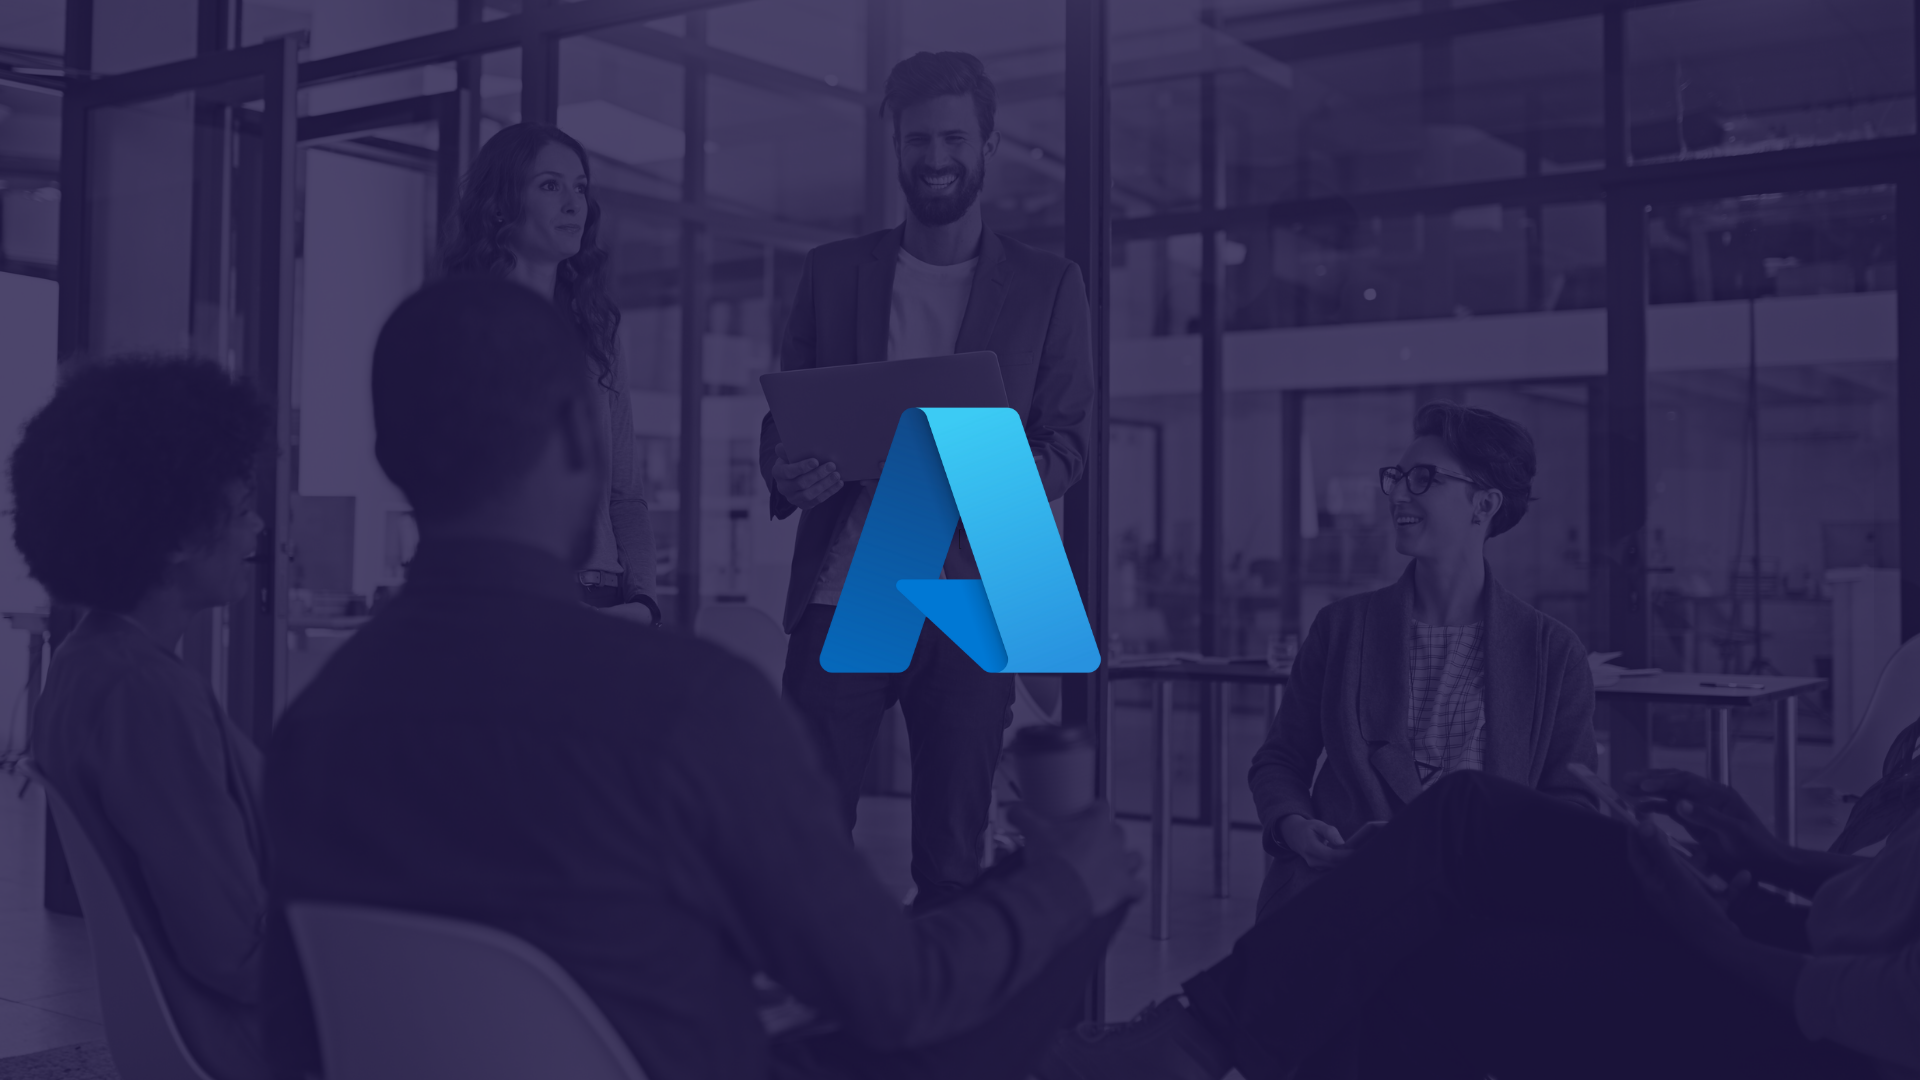 Make your business growth even smoother with Azure AI and machine learning